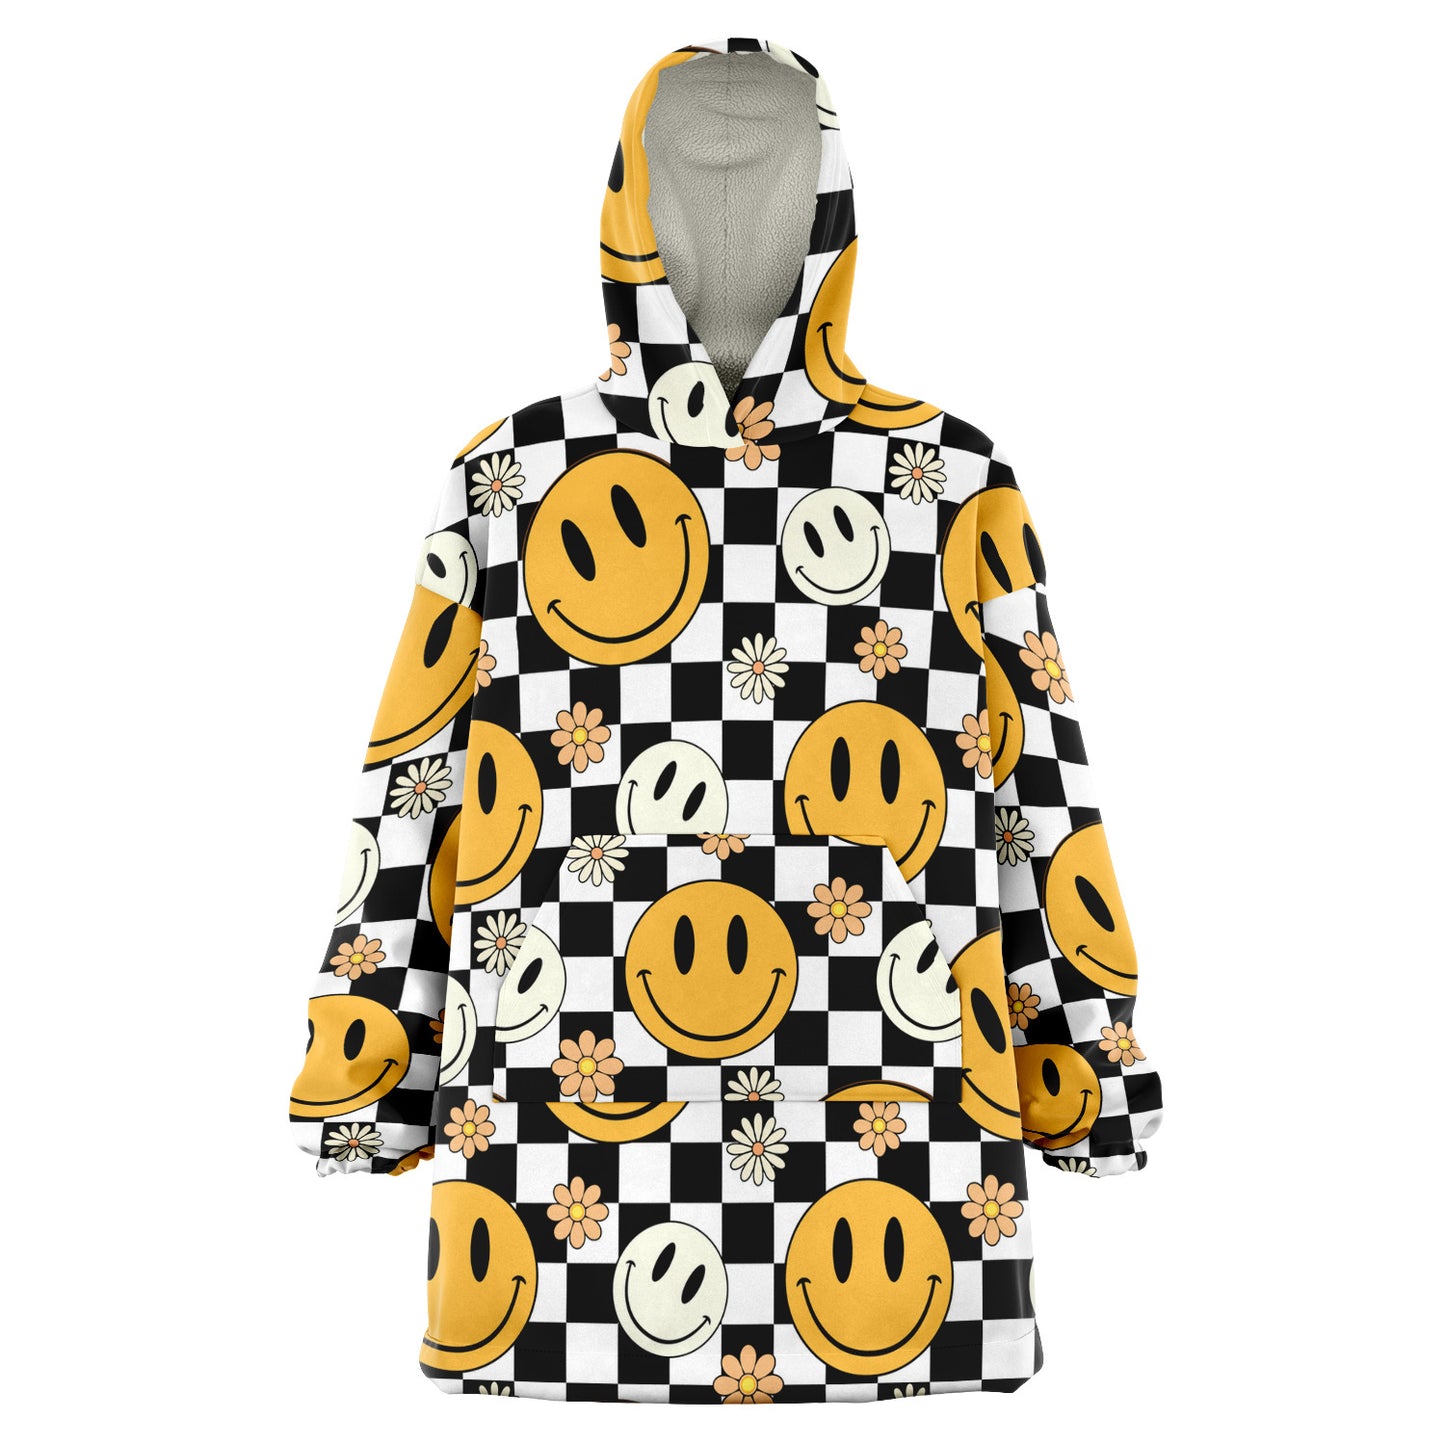 Black and white checkered Snug Hoodie with happy face and daisy flowers for him or her.